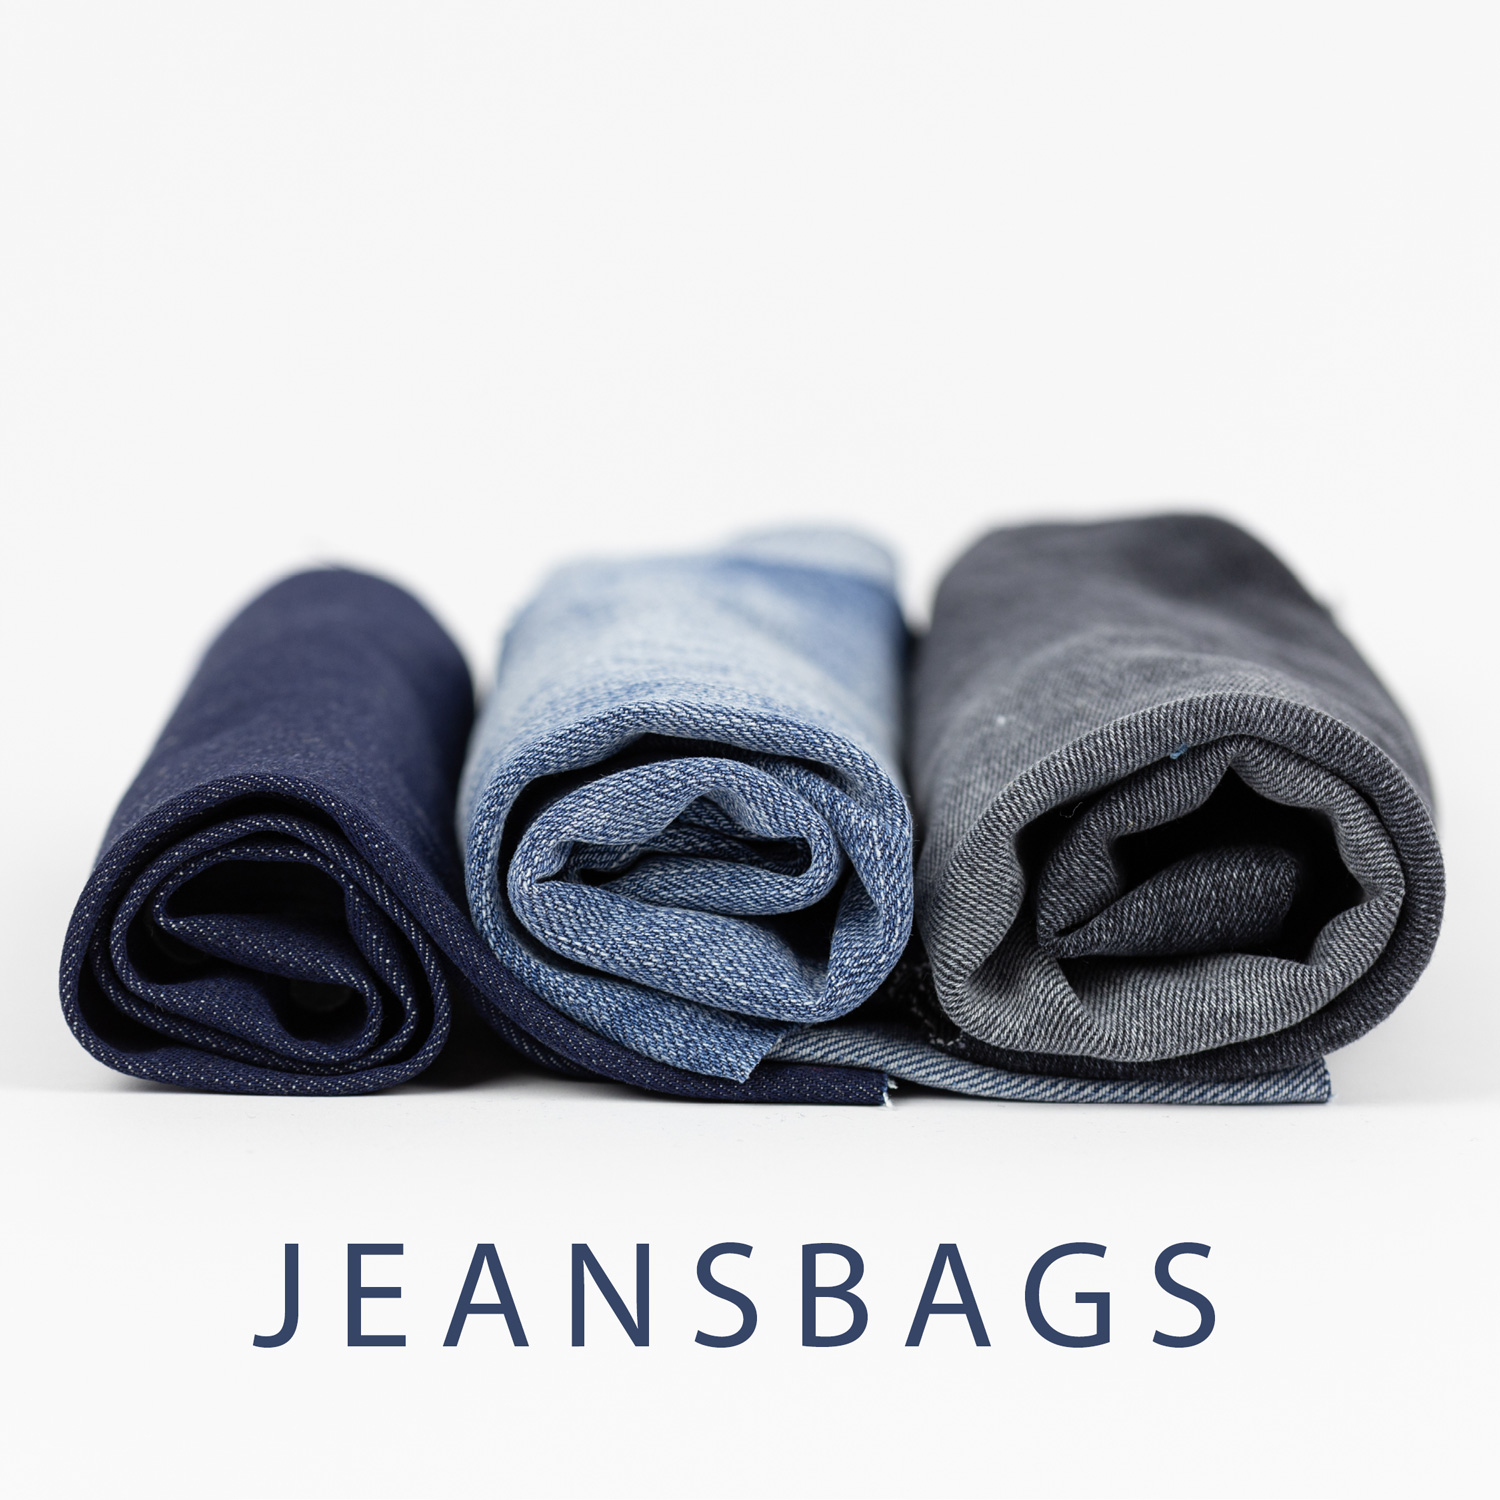 Jeansbags